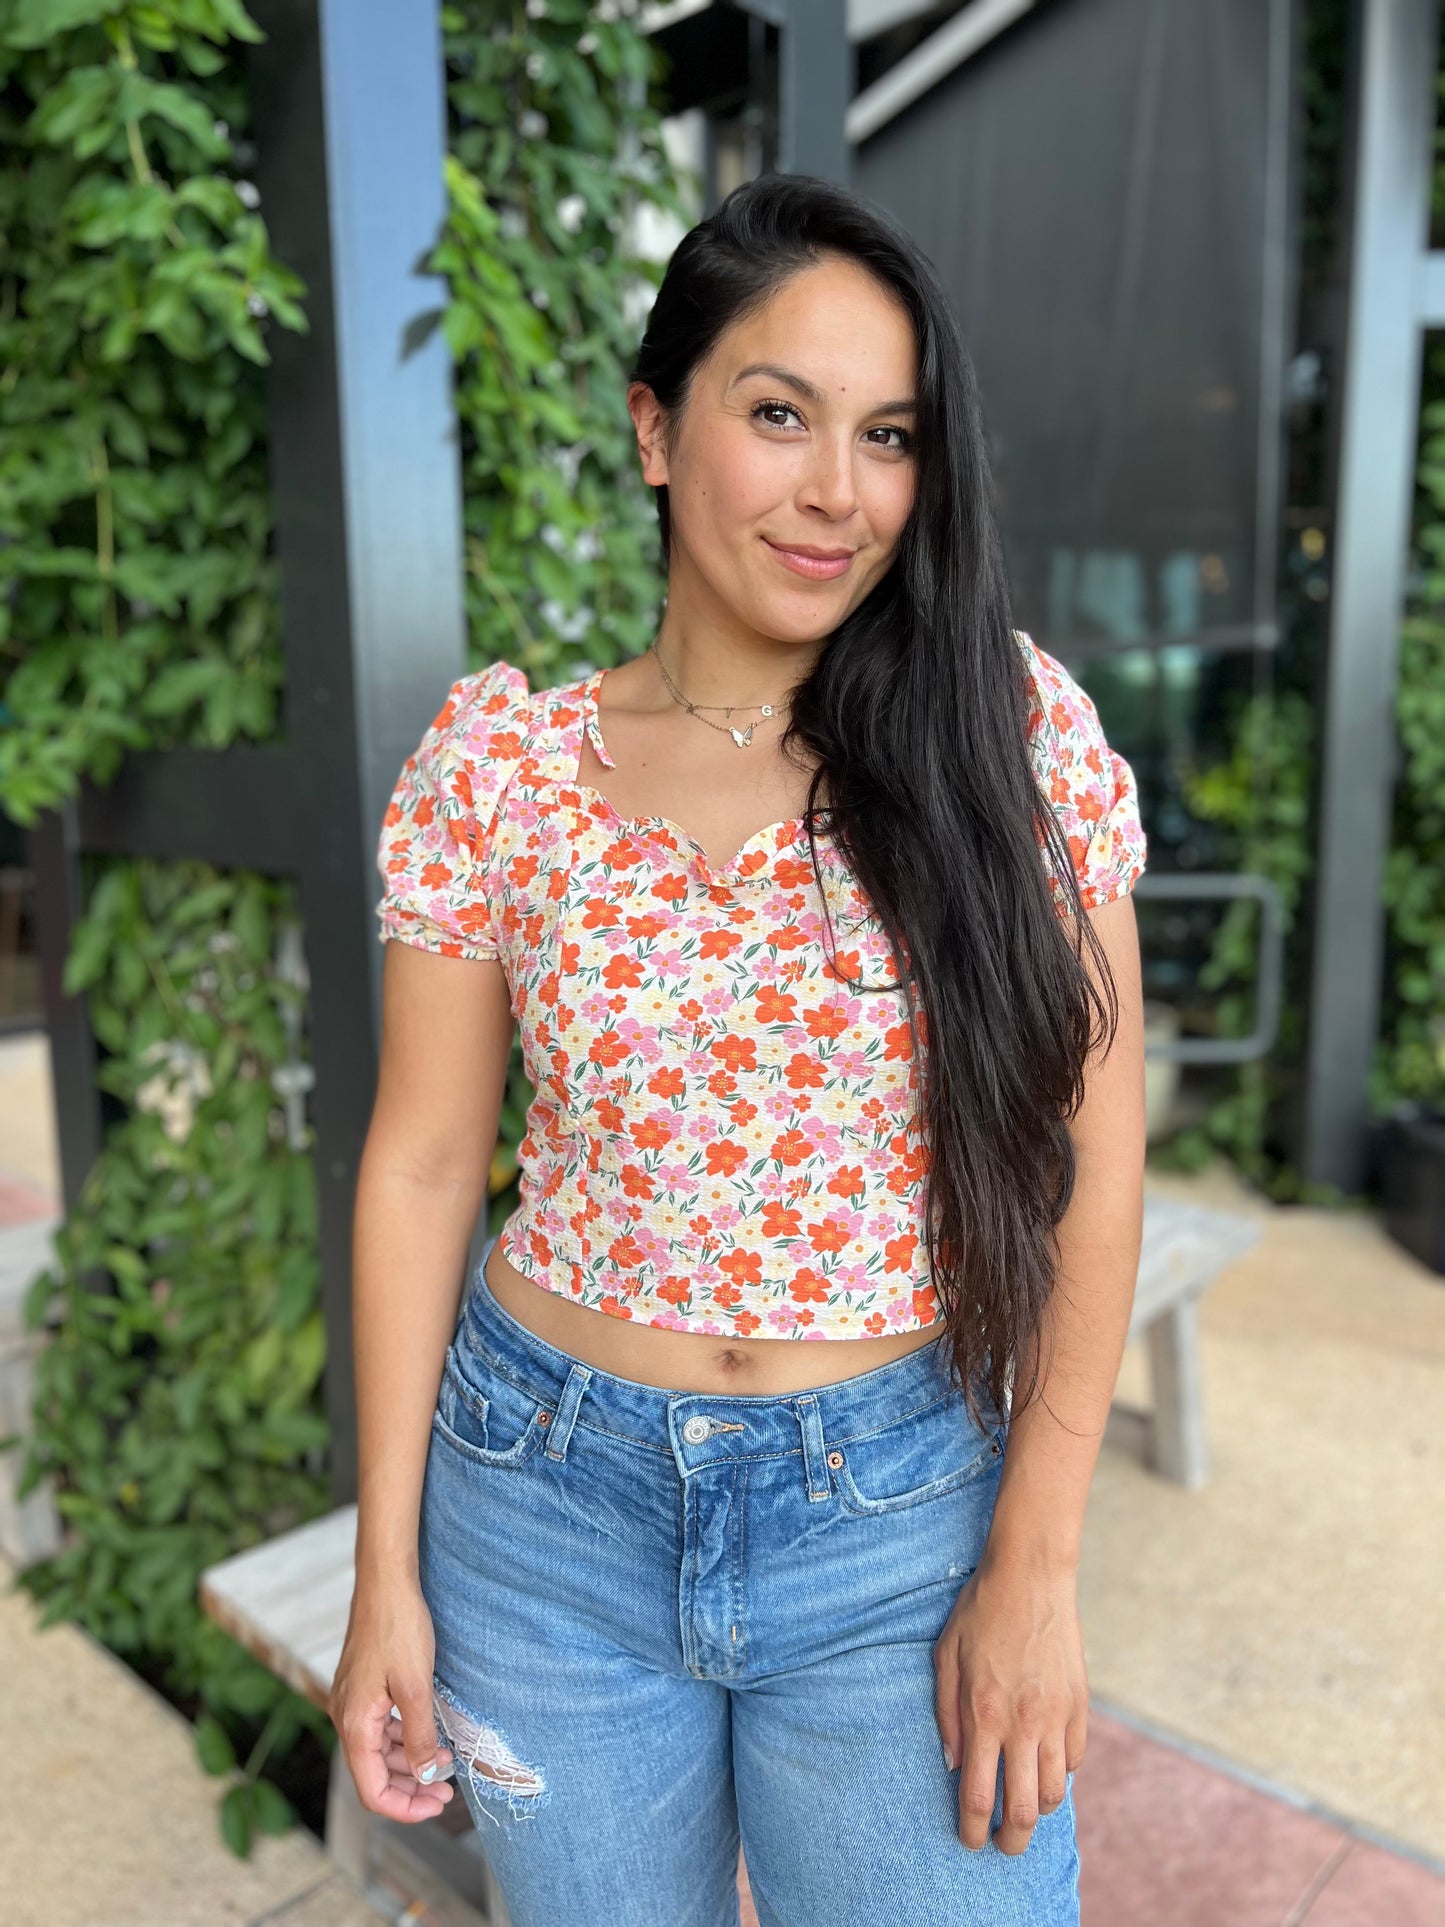 Floral Party Top